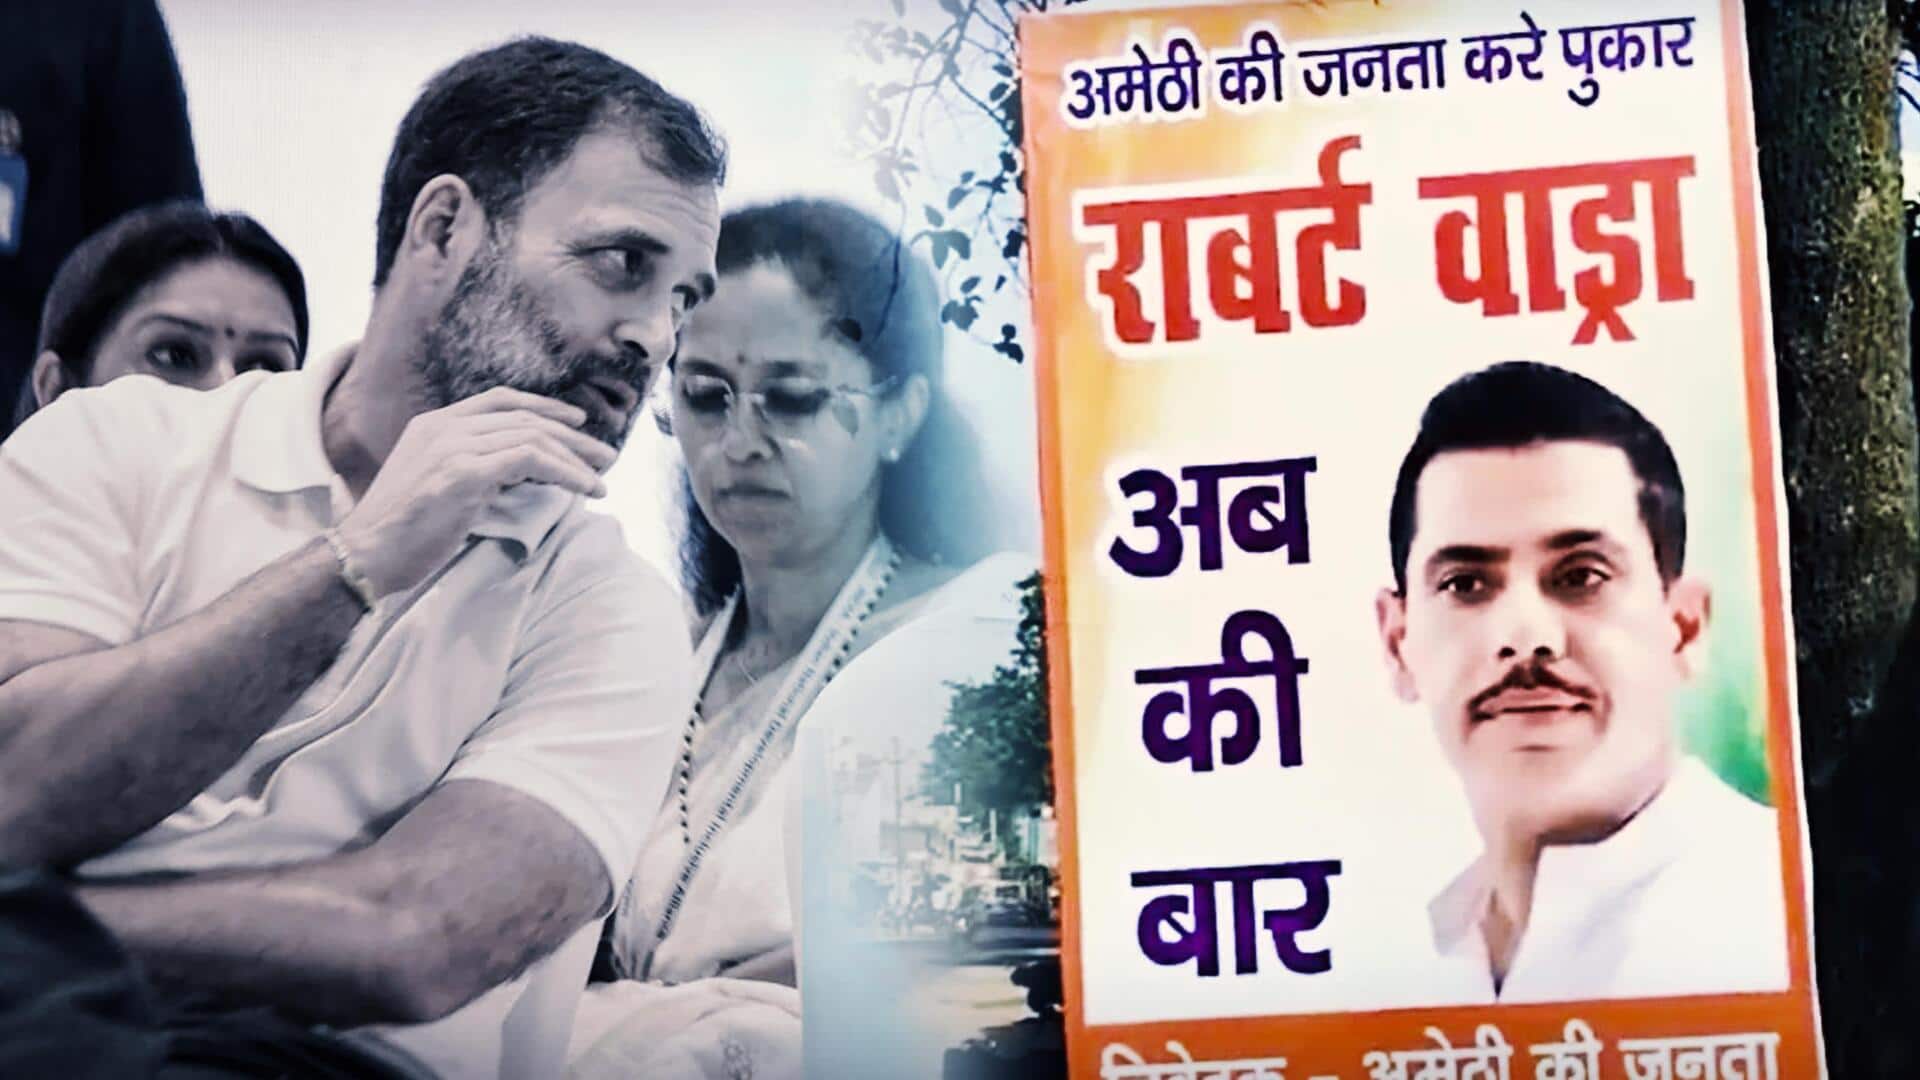 Posters featuring Robert Vadra surface in Amethi amid candidate suspense 